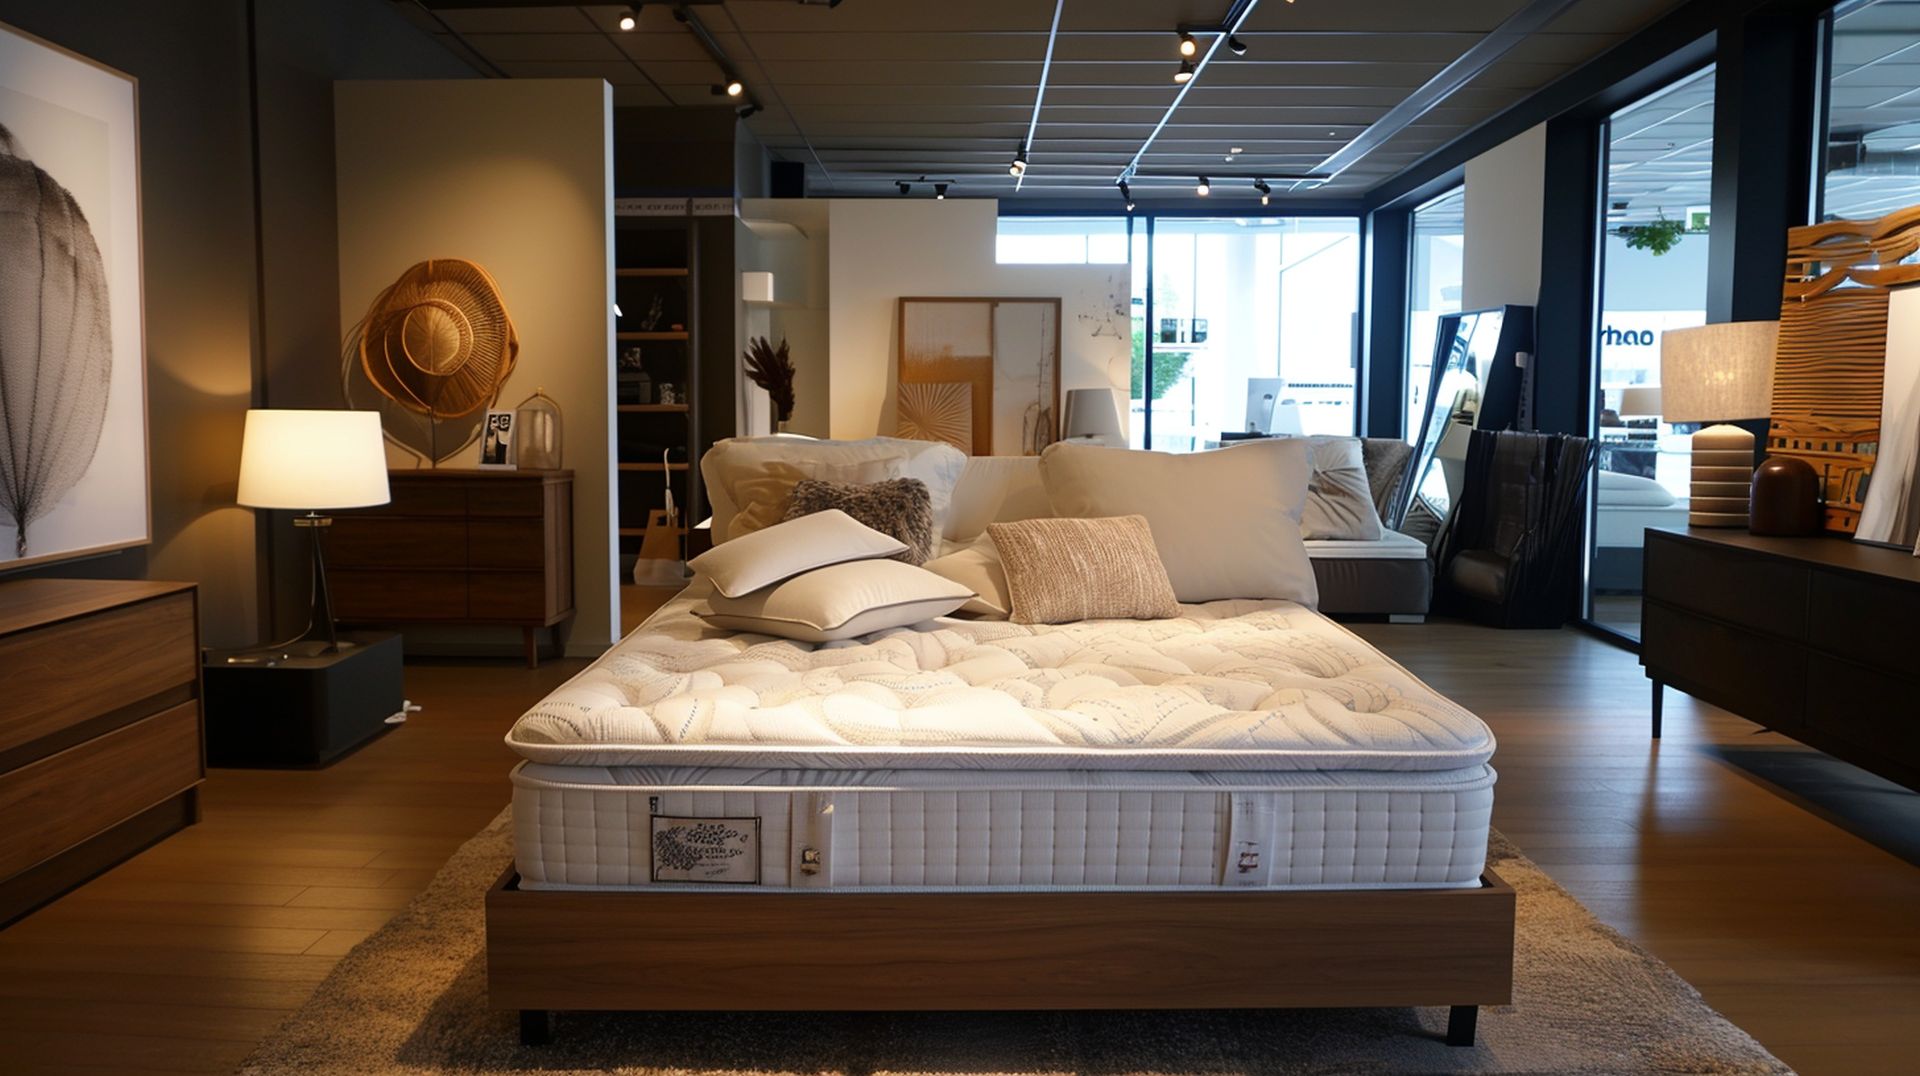 Local Sioux Falls mattress stores have the best prices, sales, and deals if you're looking for a new mattress in Sioux Falls